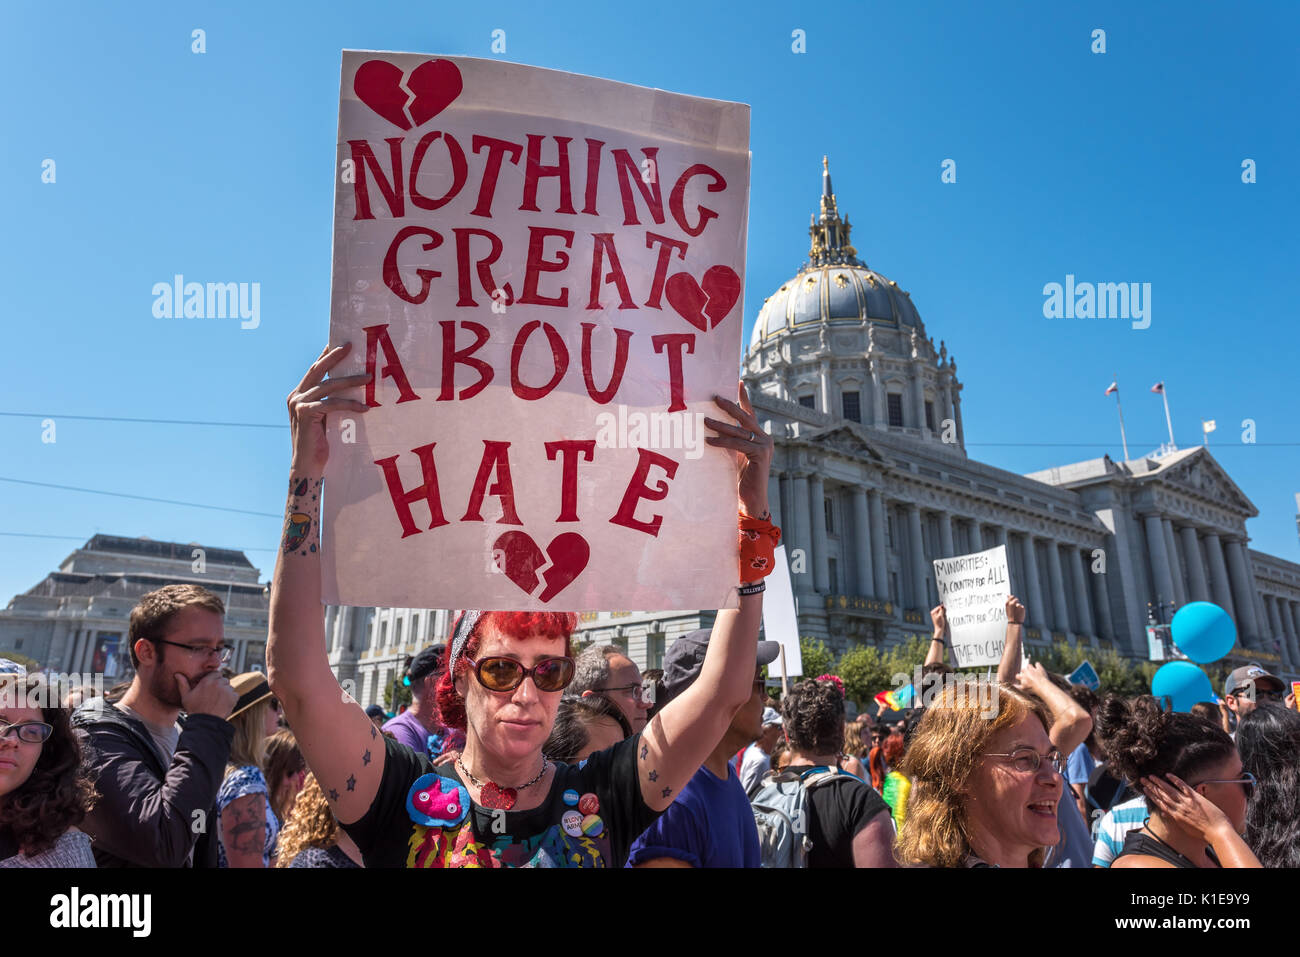 San Francisco, USA. 26th August, 2017, the No Hate rally and protest march in San Francisco. The group gathered at Harvey Milk Plaza in San Francisco's Castro district for a rally before marching down Market Street to San Francisco City Hall. Originally planned as one of several counter protests to a previously planned demonstration by right wing group 'Patriot Prayer,' the counter protests in San Francisco still saw large turnouts in a show of support though the Patriot Prayer event was canceled the evening prior. Credit: Shelly Rivoli/Alamy Live News Stock Photo